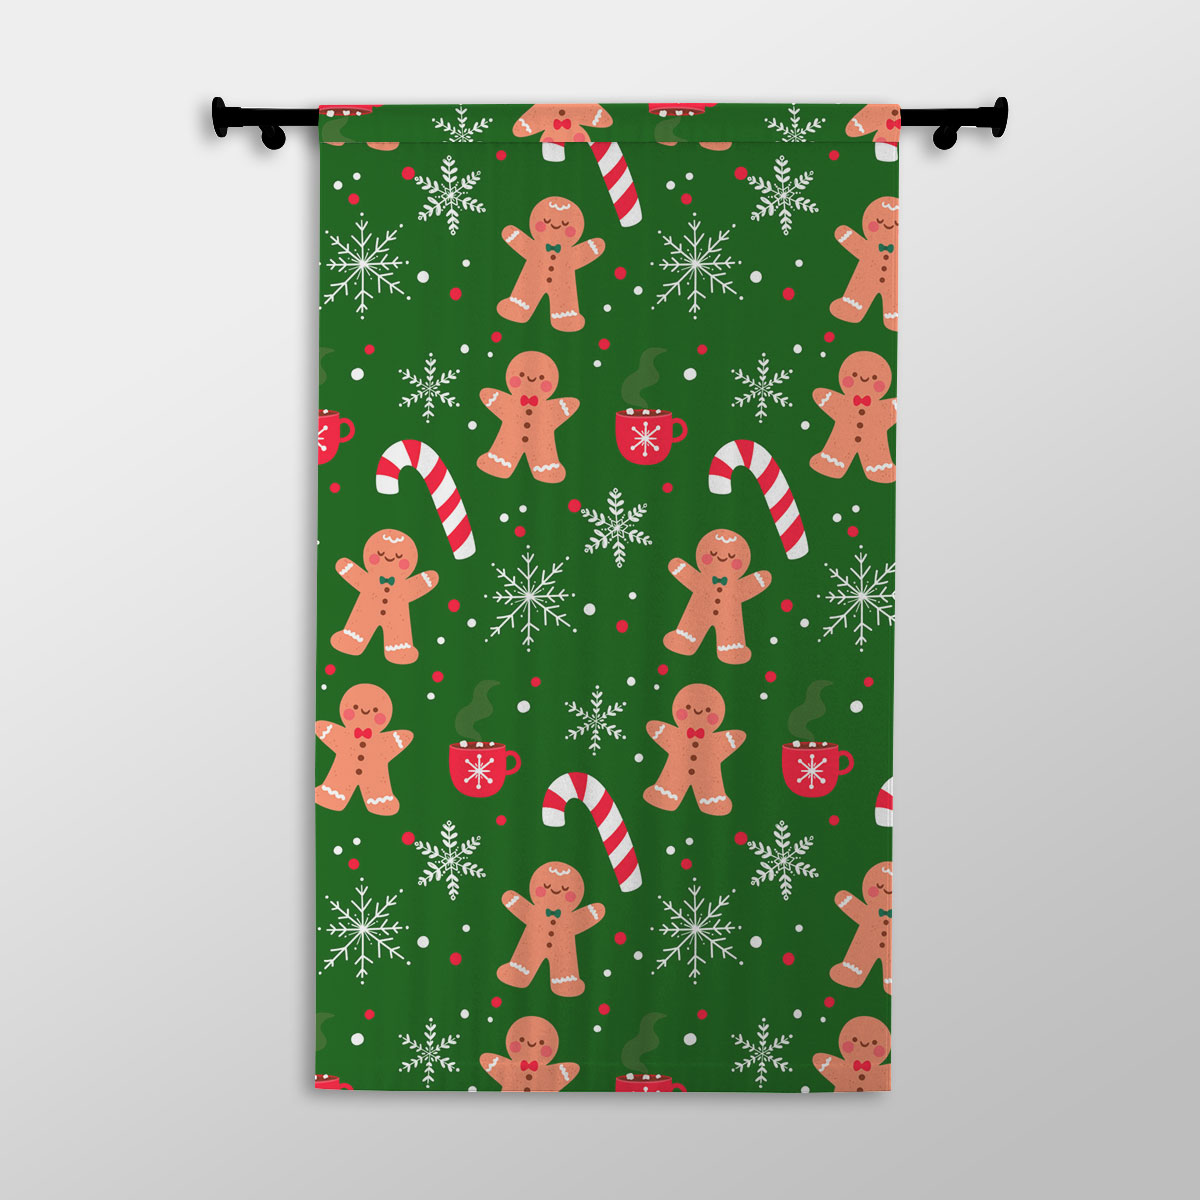 Red Green And White Gingerbread Man, Candy Cane With Snowflake Printed Window Curtains